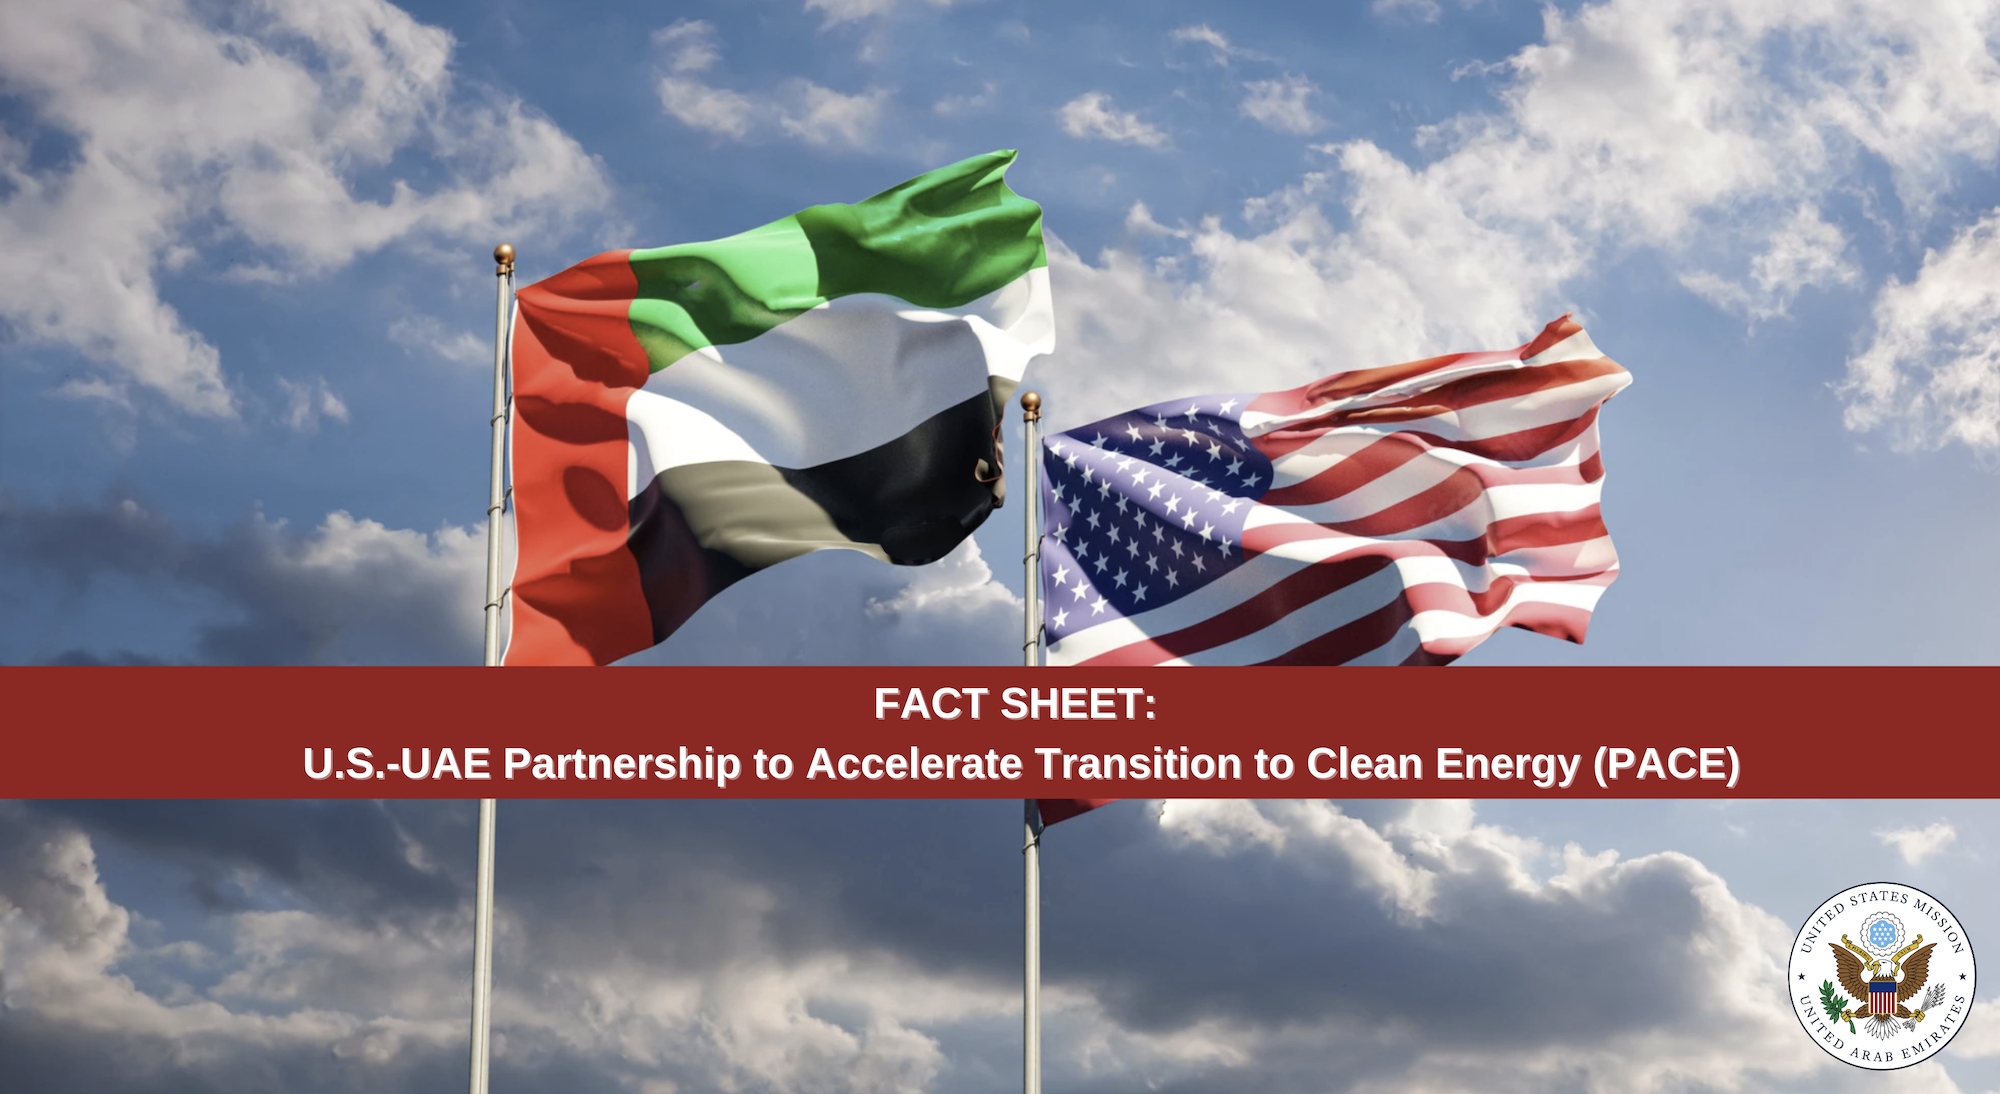 FACT SHEET: U.S.-UAE Partnership to Accelerate Transition to Clean Energy (PACE)